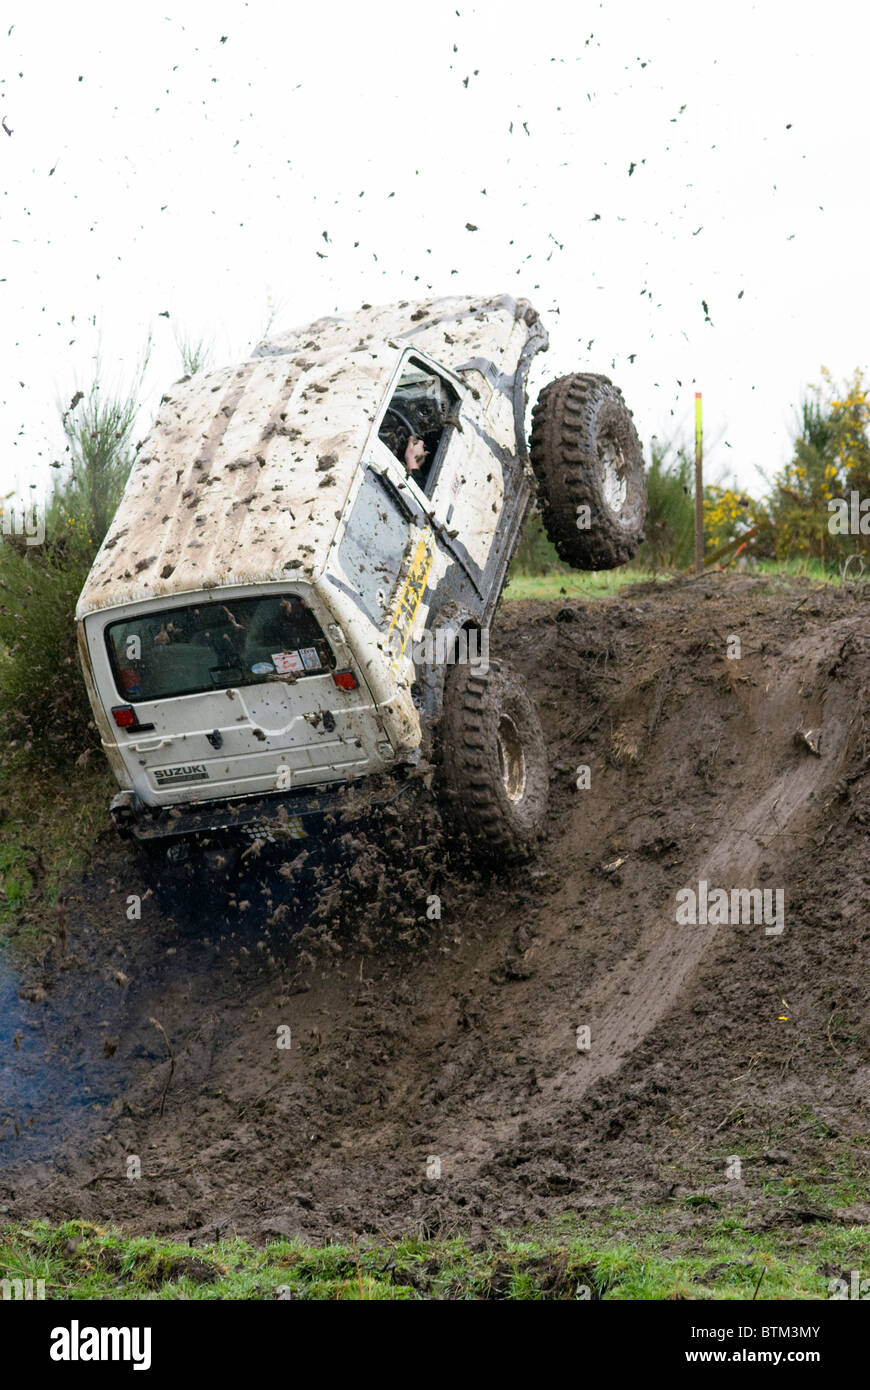 Off road mud driving New Zealand Stock Photo